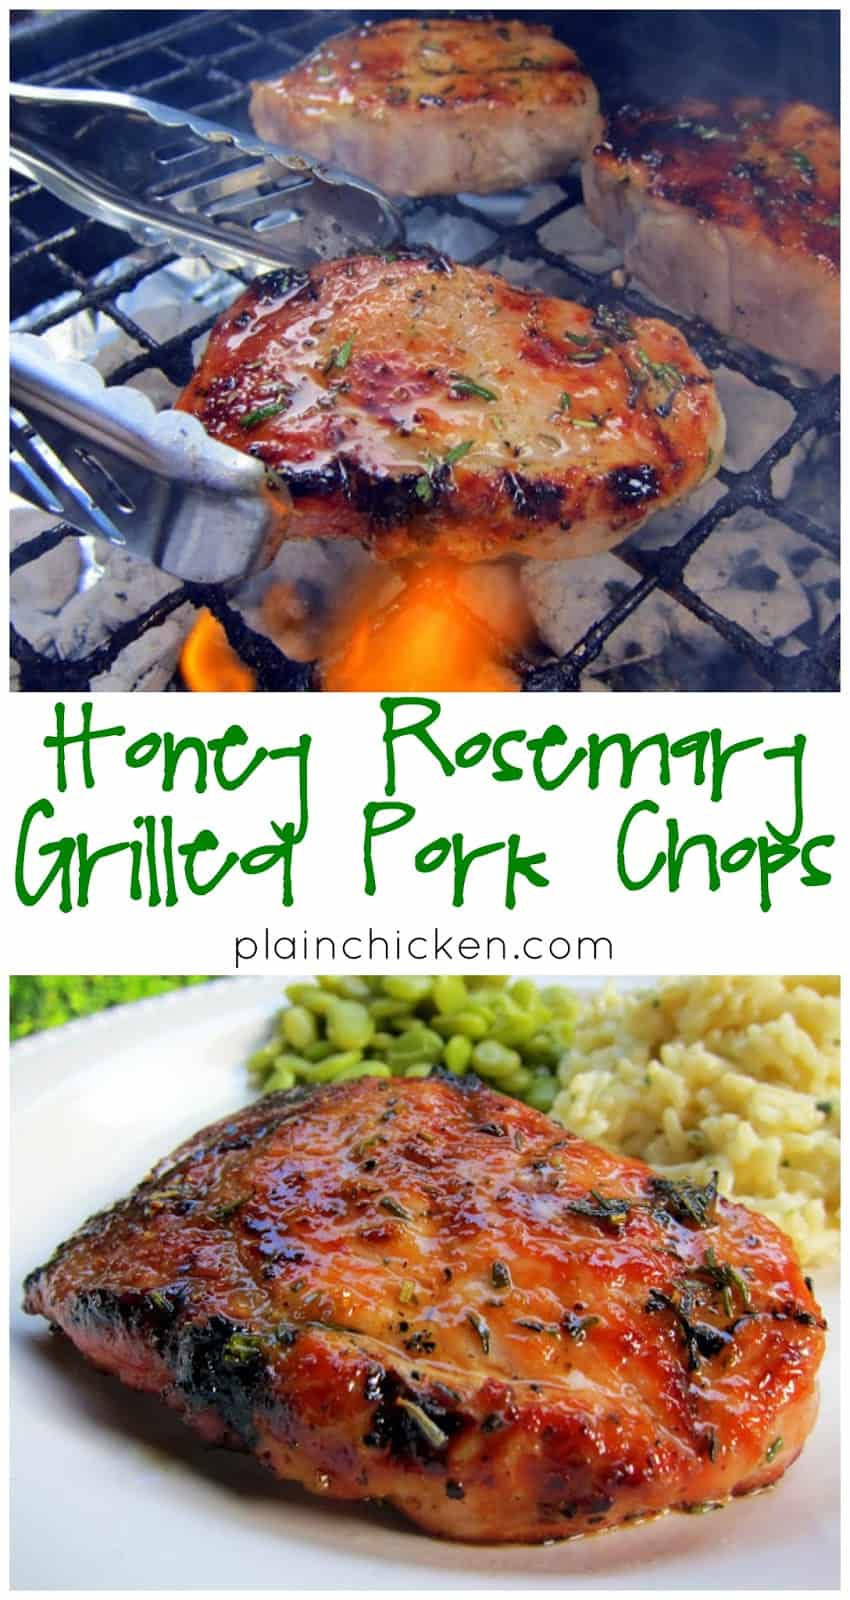 Honey Rosemary Grilled Pork Chops - pork brushed with honey, olive oil, and fresh rosemary. I prepped the meat while the grill heated up.  It only took a few minutes. The pork chops were tender, juicy and packed full of flavor.  The rosemary was so fragrant, and the honey added the perfect touch of sweetness.